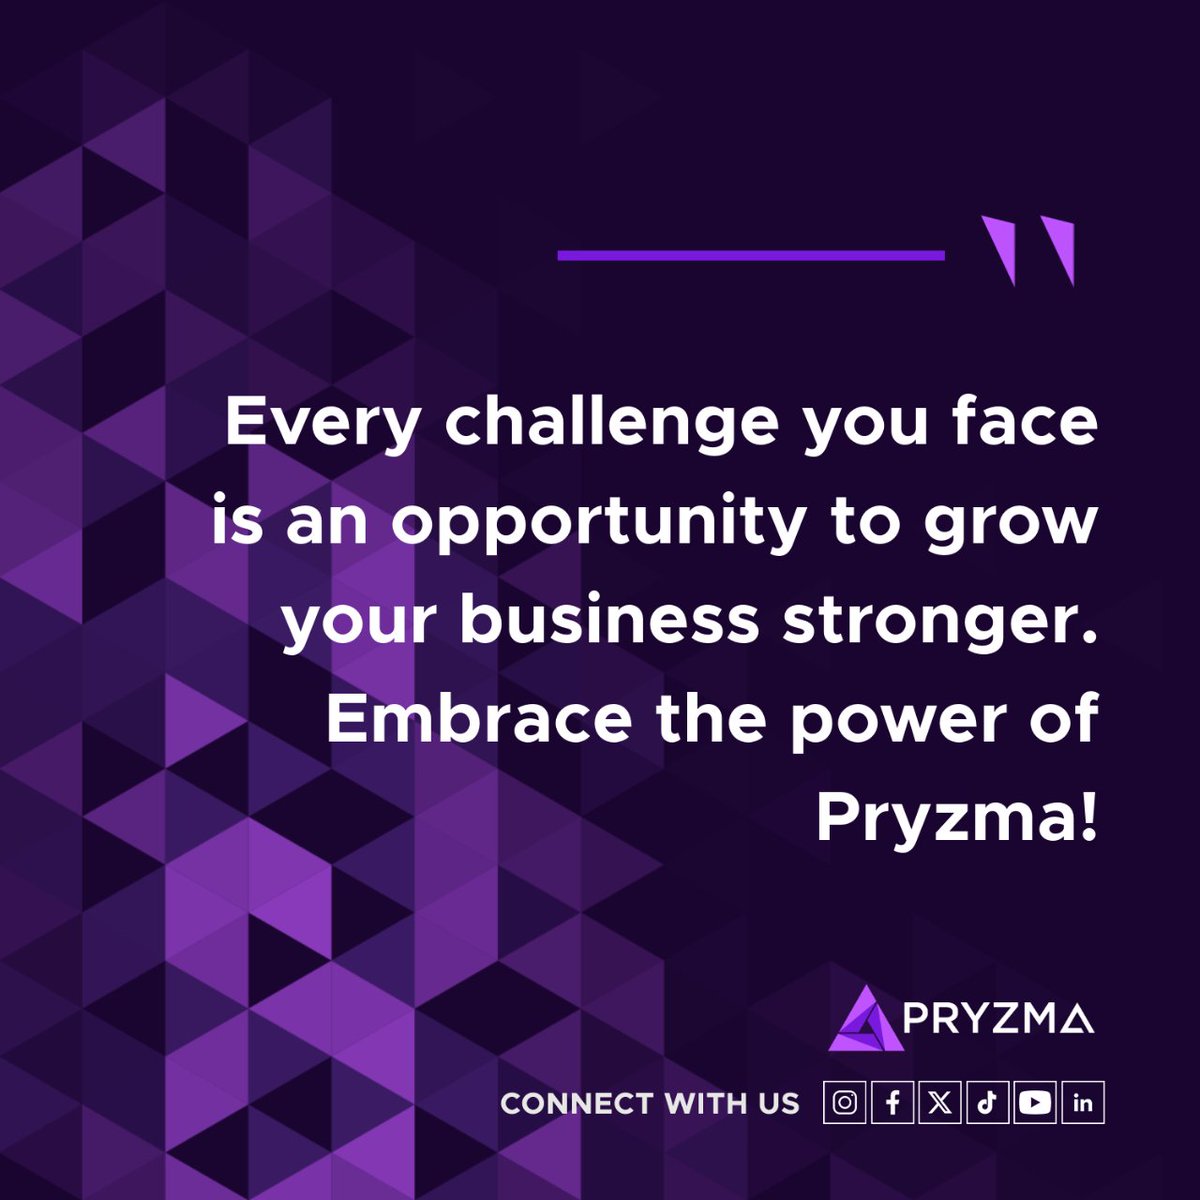 In every challenge lies an opportunity to grow. Embrace the journey, for it will lead you to greater strength and resilience. Let the power of Pryzma get you there 💪 

#ecommerce #ecommercebusiness #businessmotivation #amazonfba #amazonseller #ebayseller #walmartseller #pryzma